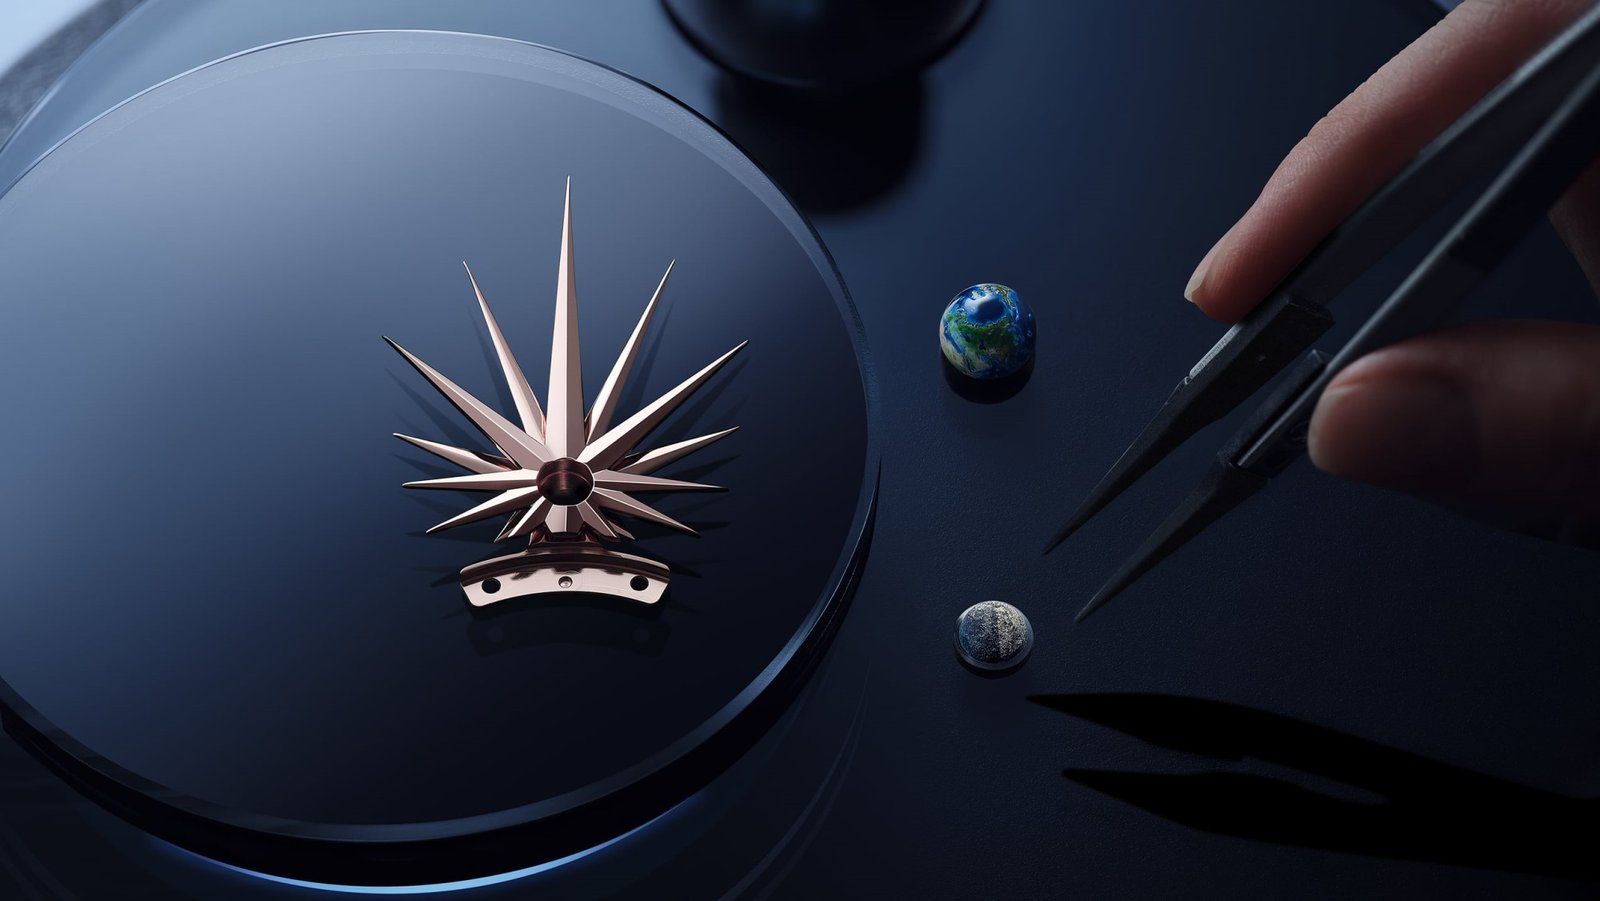 2022 Stellar Odyssey collection in keeping with the cosmic theme of W&W - Jaeger-LeCoultre